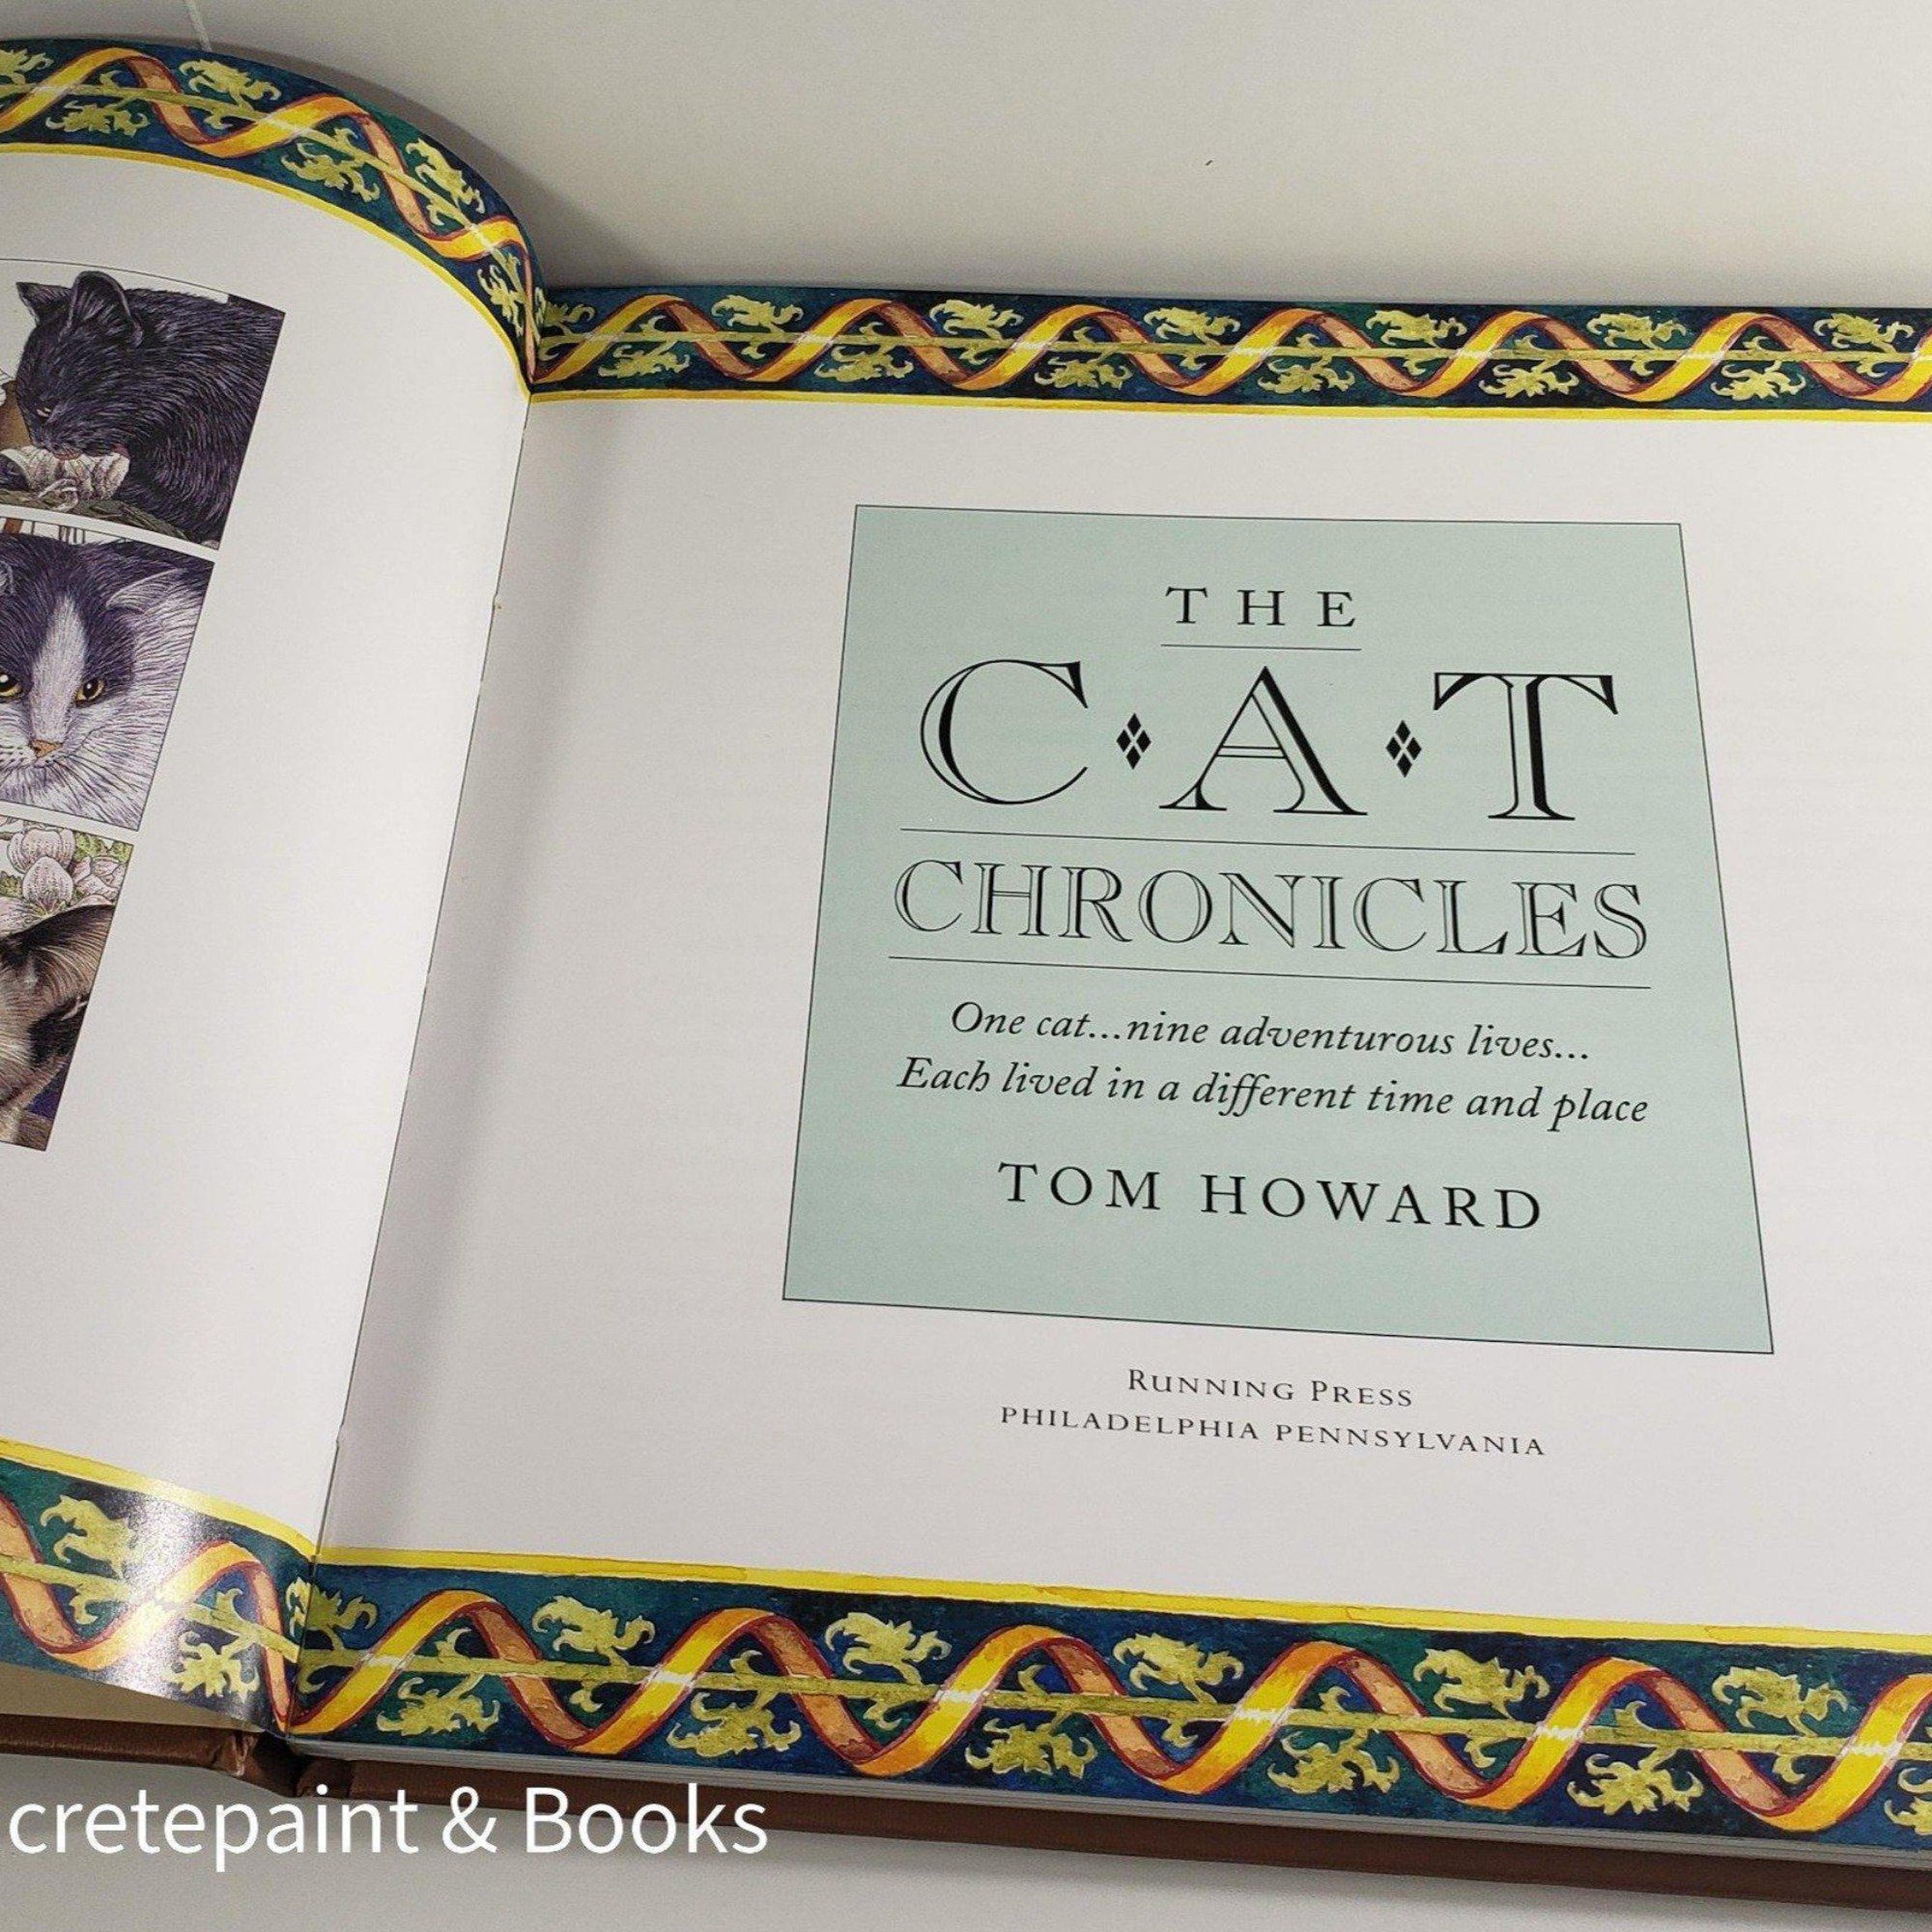 the cat cronicles hardcover book by tom howard